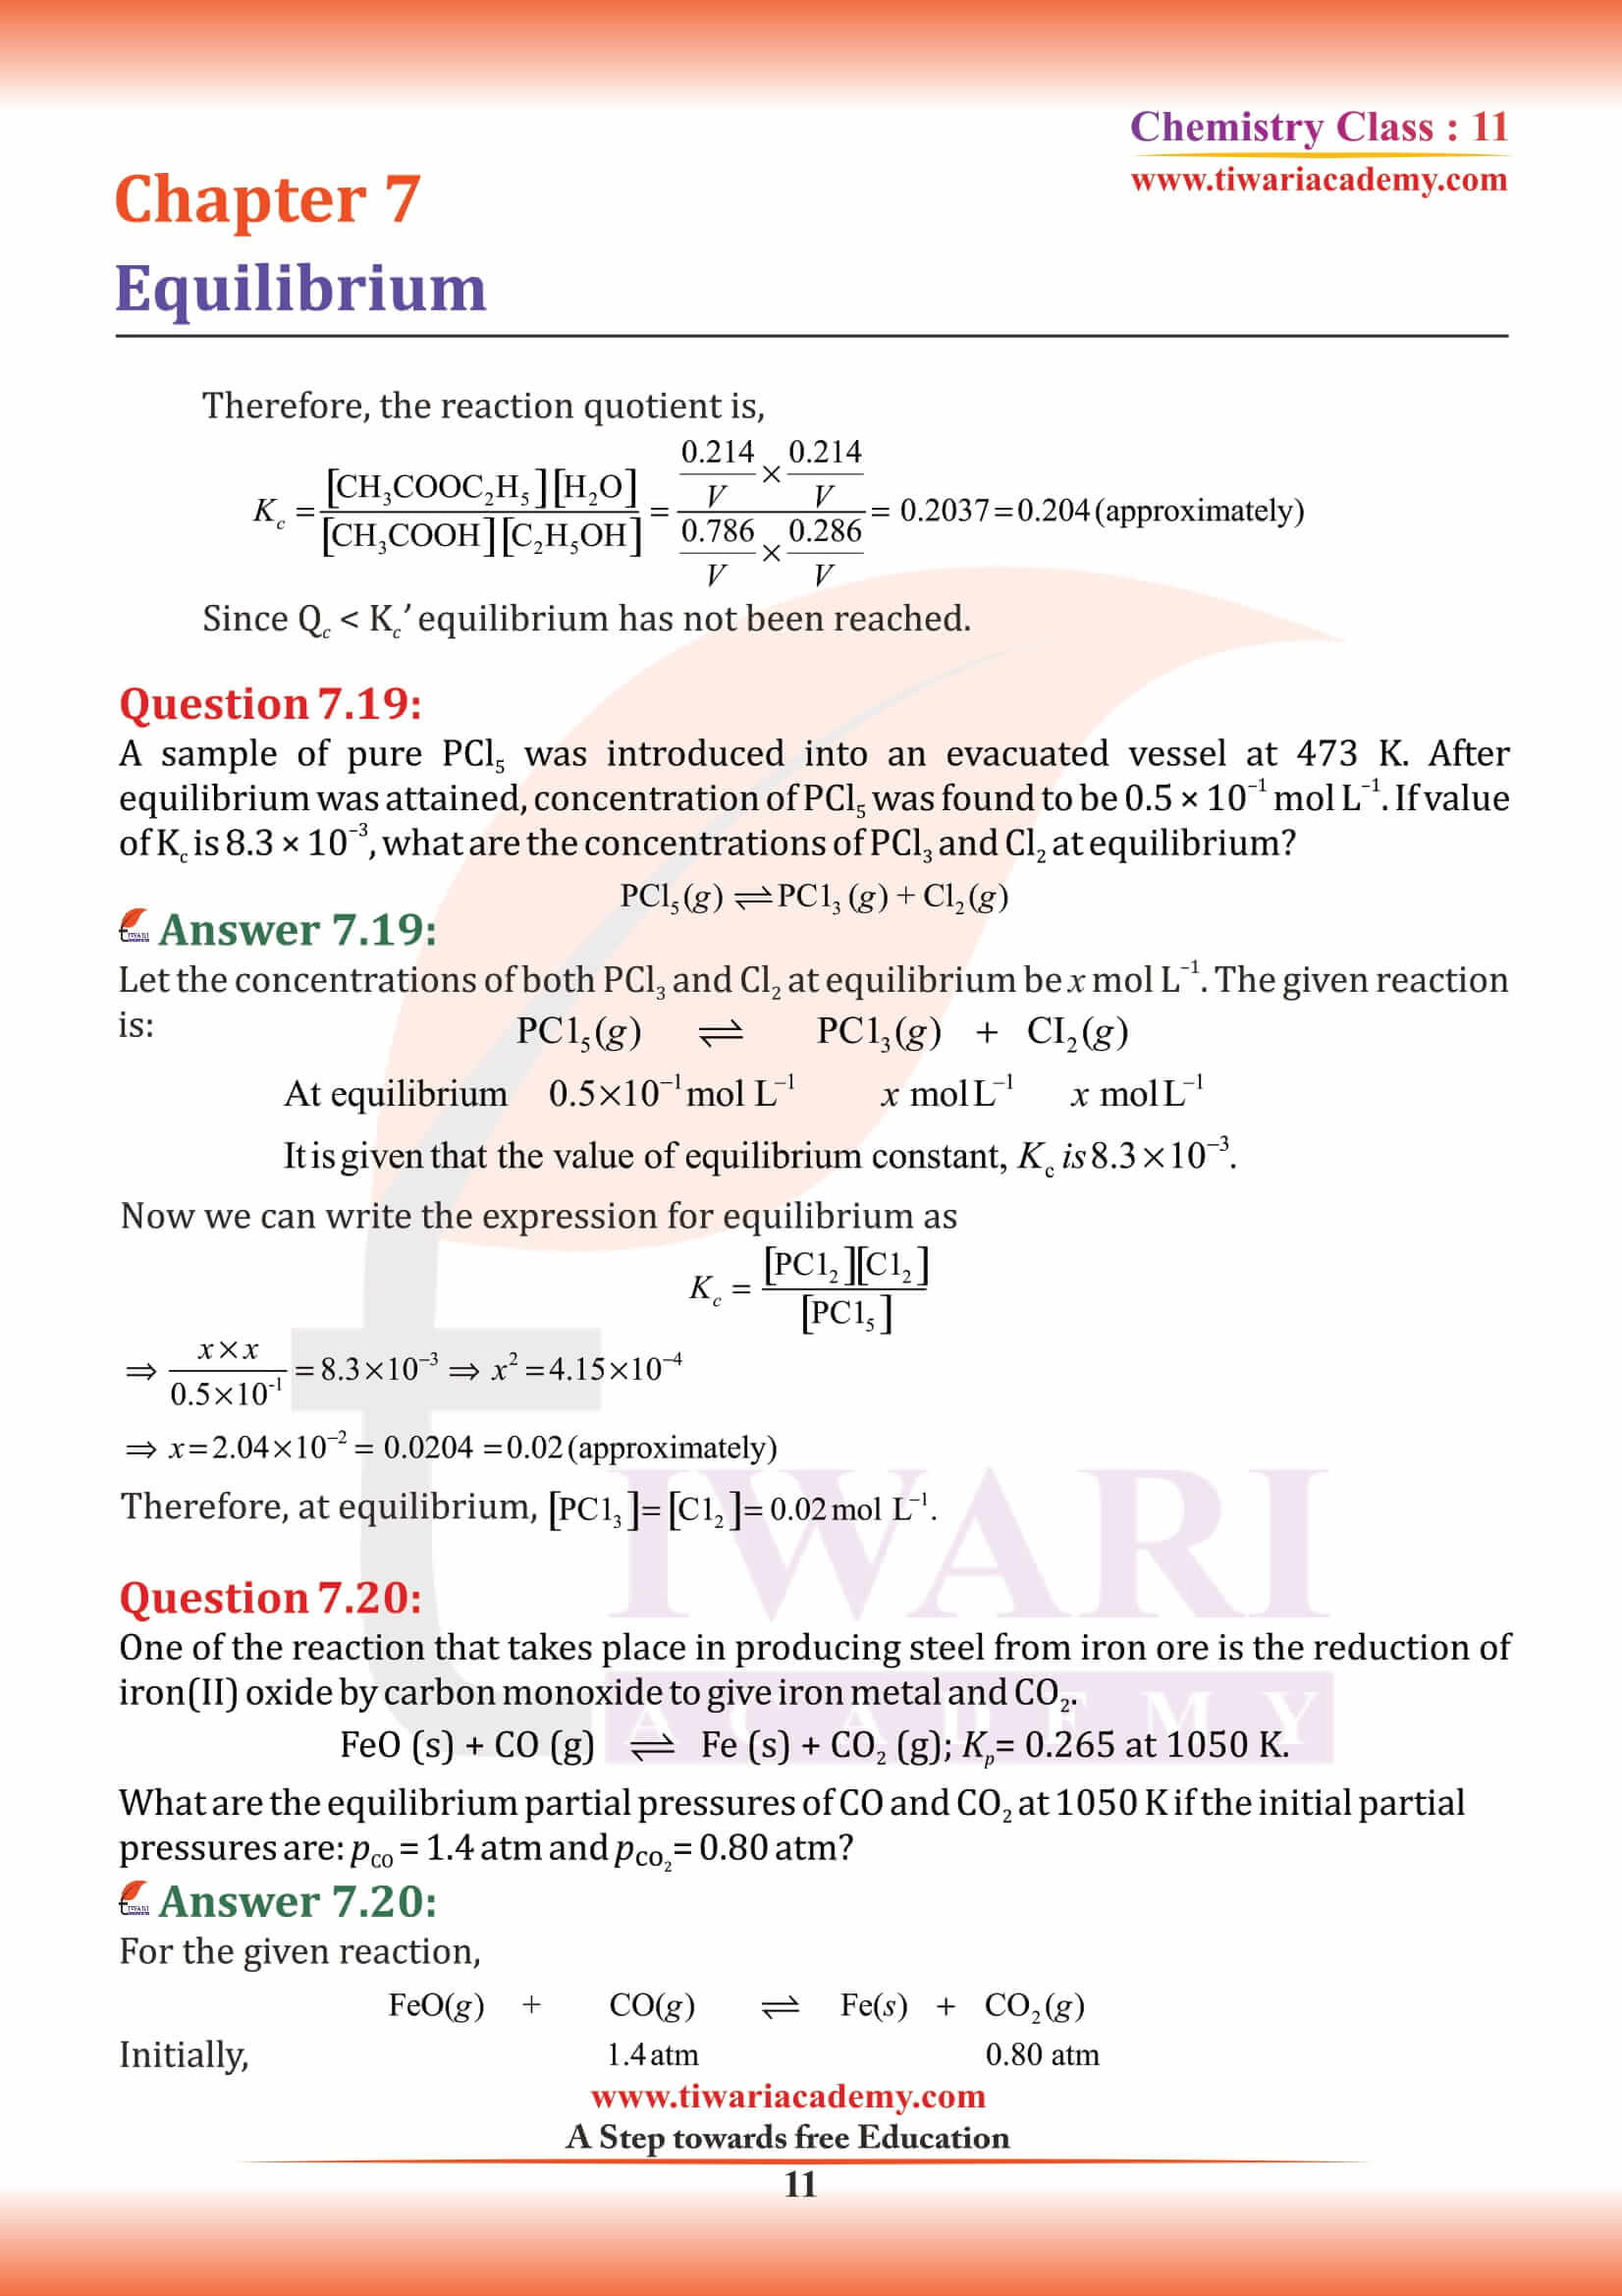 NCERT Solutions for Class 11 Chemistry Chapter 7 Extra question